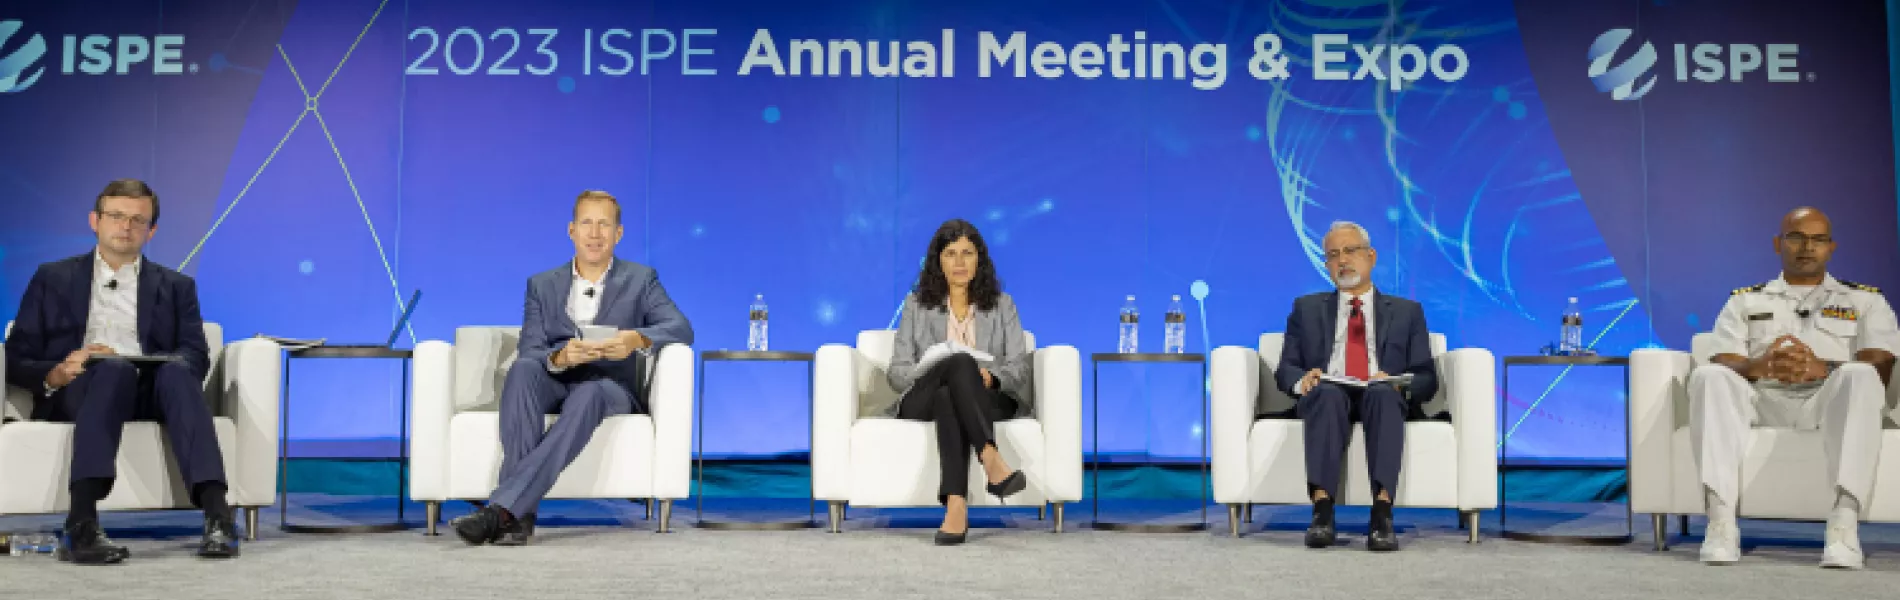 2023 ISPE Annual Meeting & Expo: Attendees Hit the Educational/Networking Jackpot at Annual Meeting